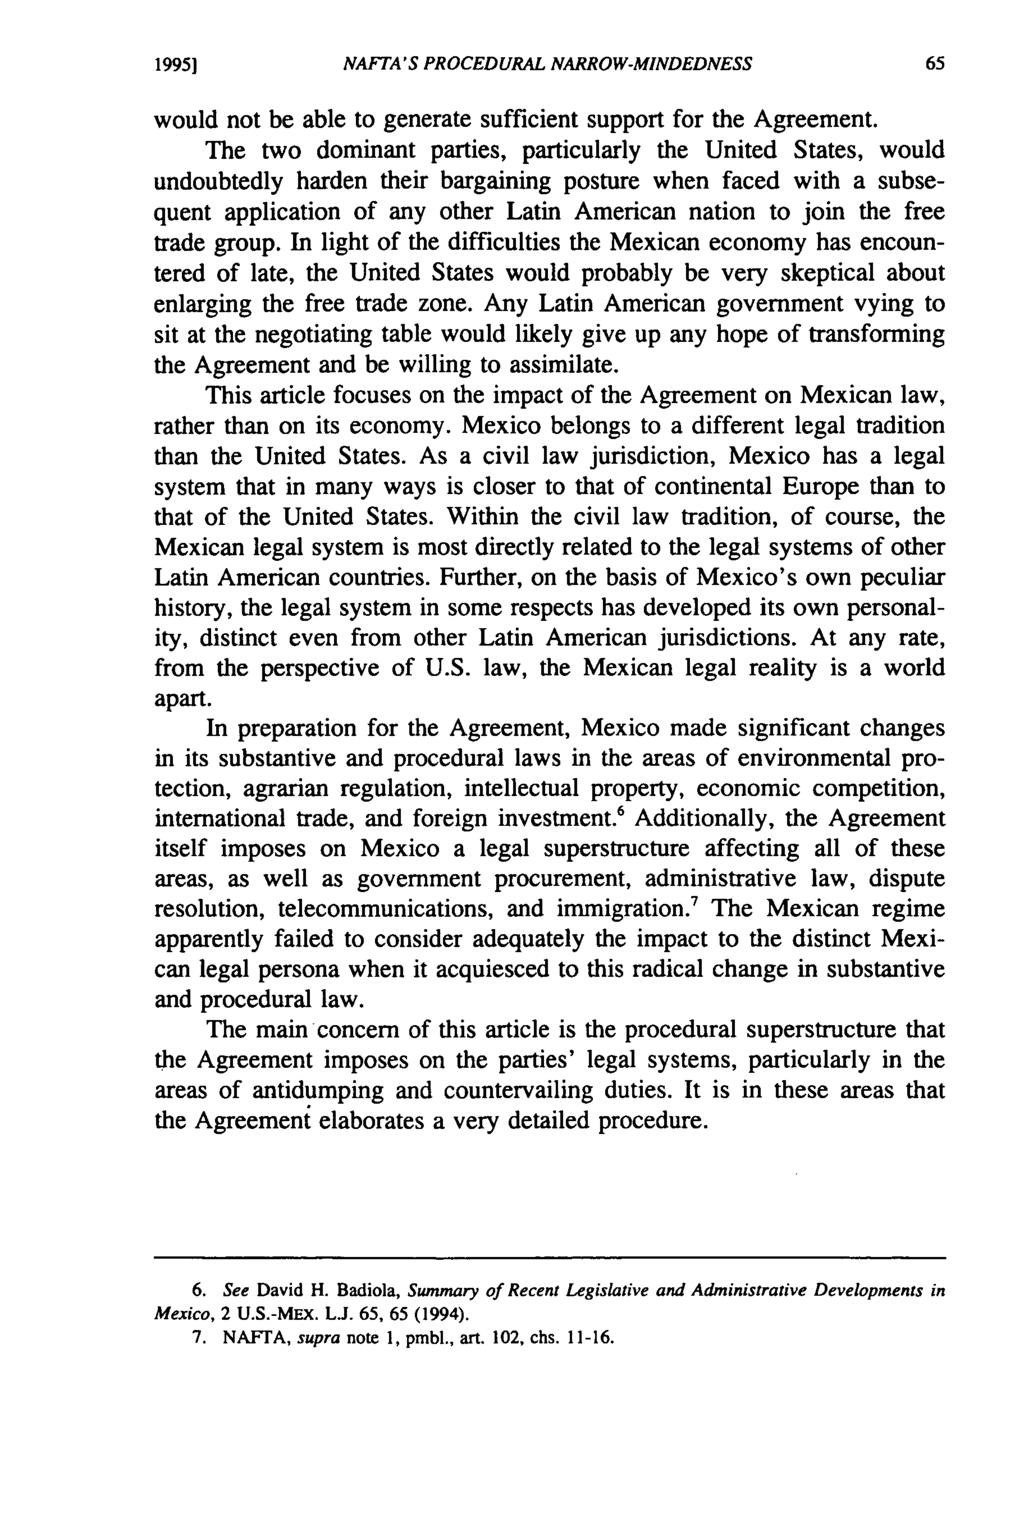 19951 NAFTA'S PROCEDURAL NARROW-MINDEDNESS would not be able to generate sufficient support for the Agreement.